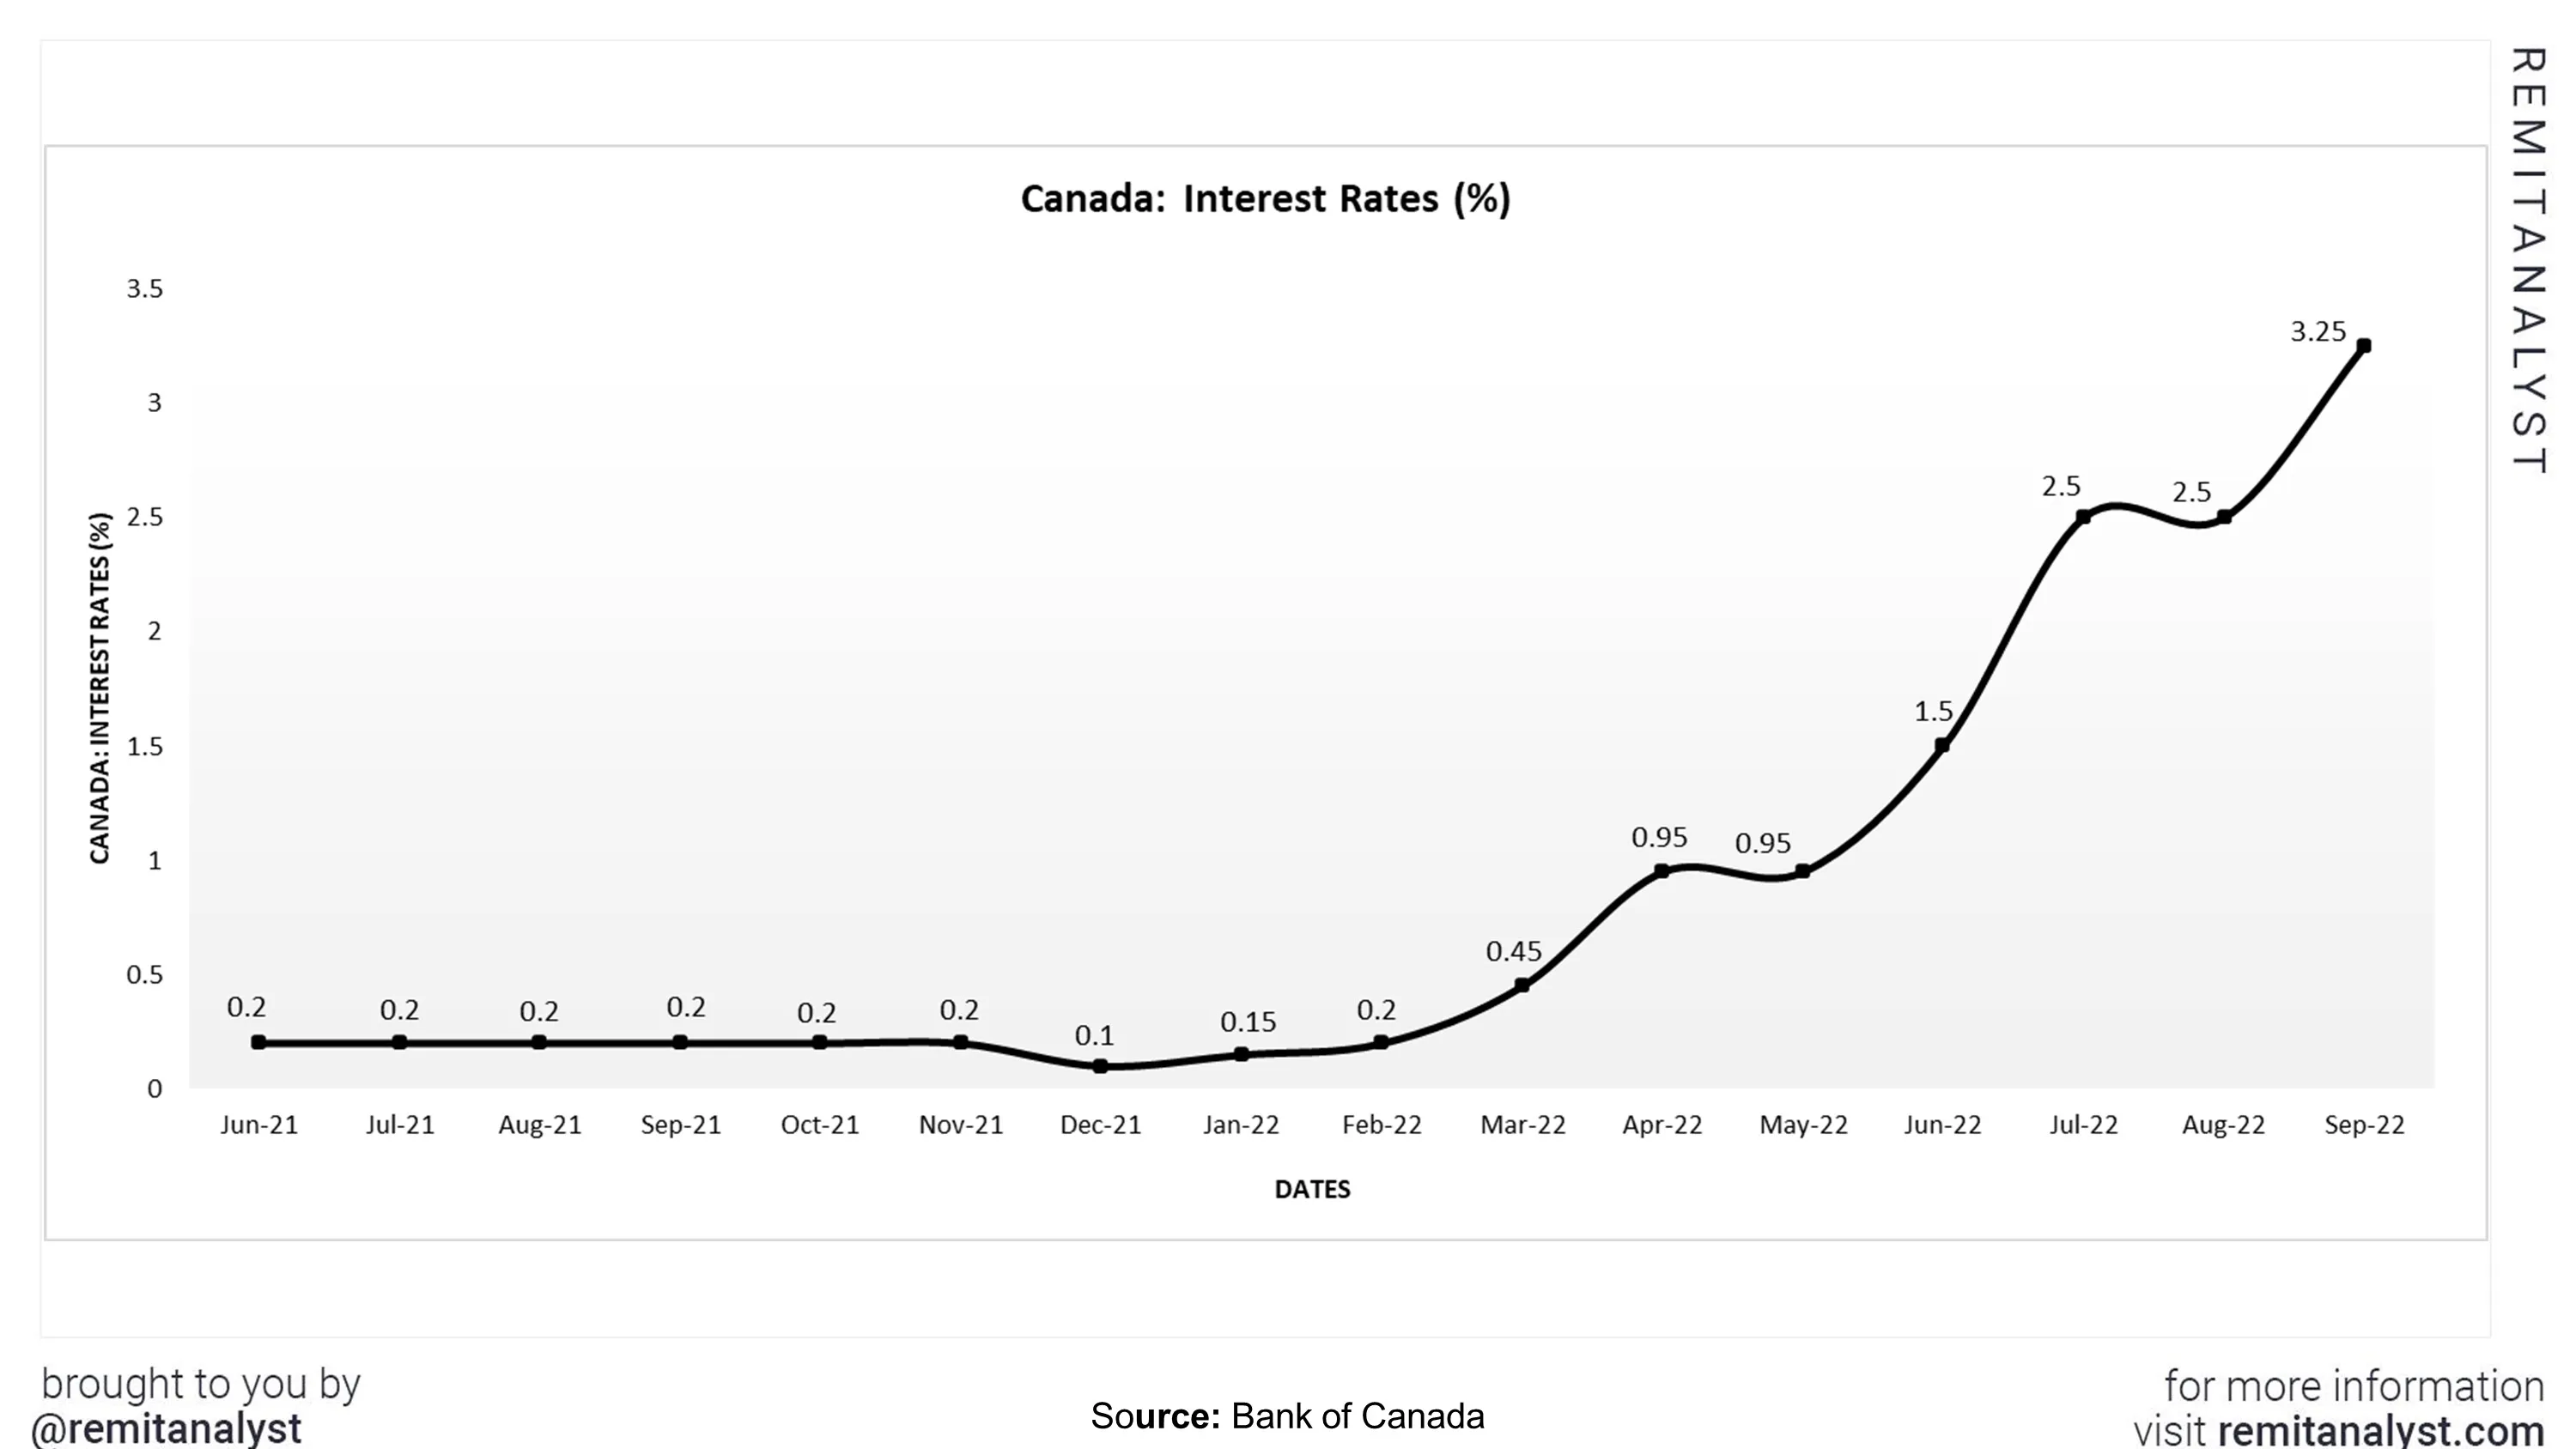 interest-rates-canada-from-jun-2021-to-sep-2022